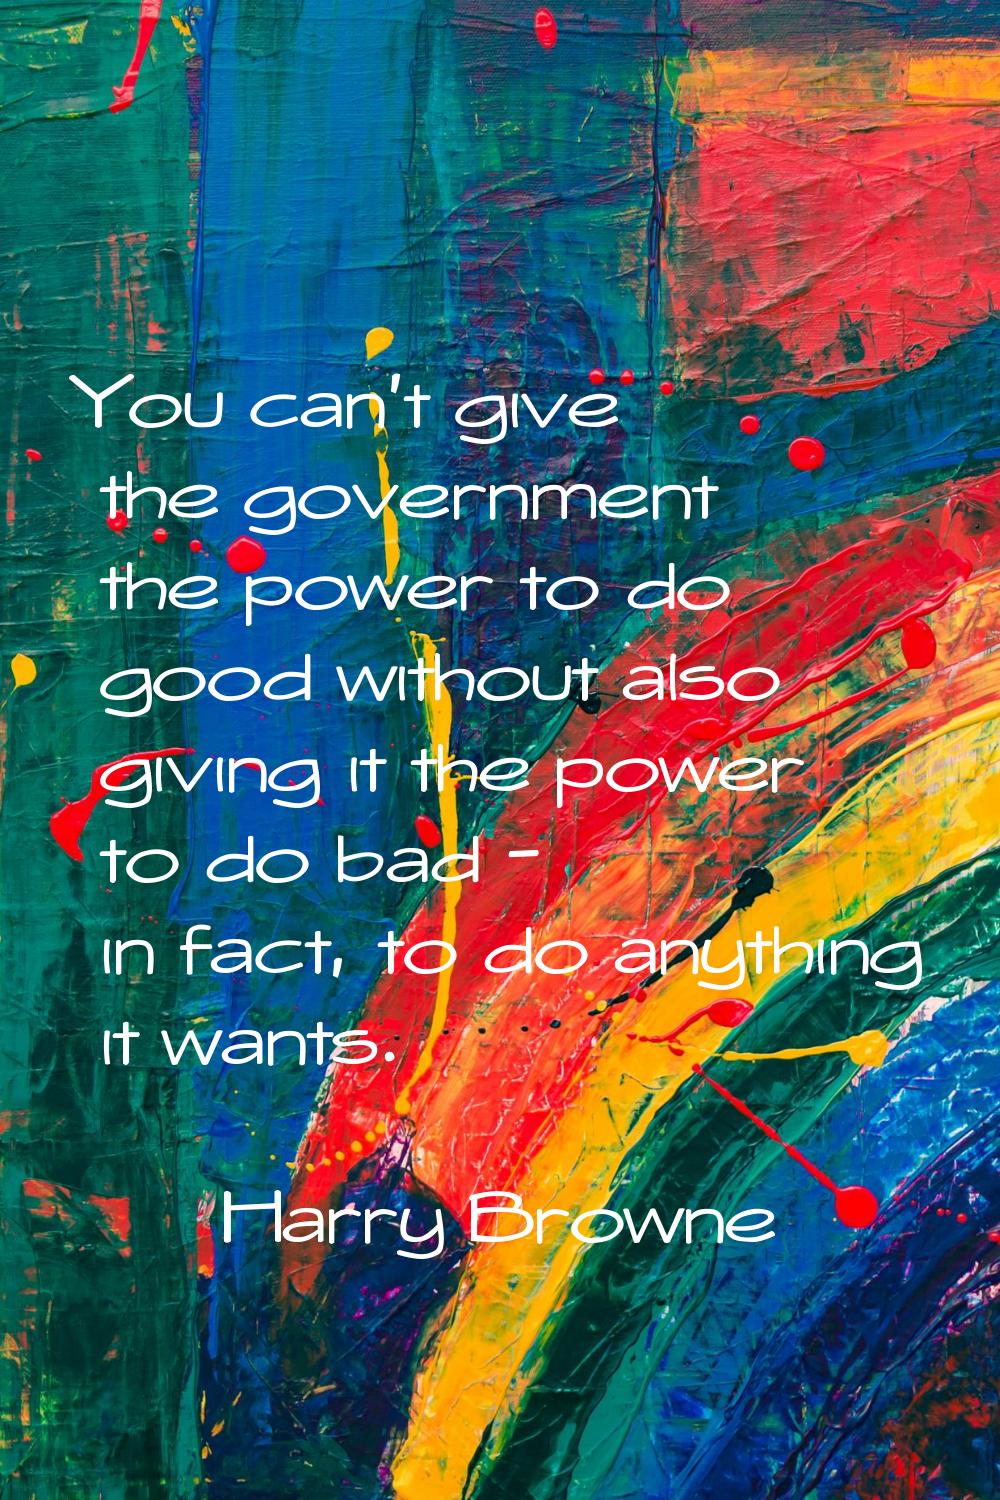 You can't give the government the power to do good without also giving it the power to do bad - in 